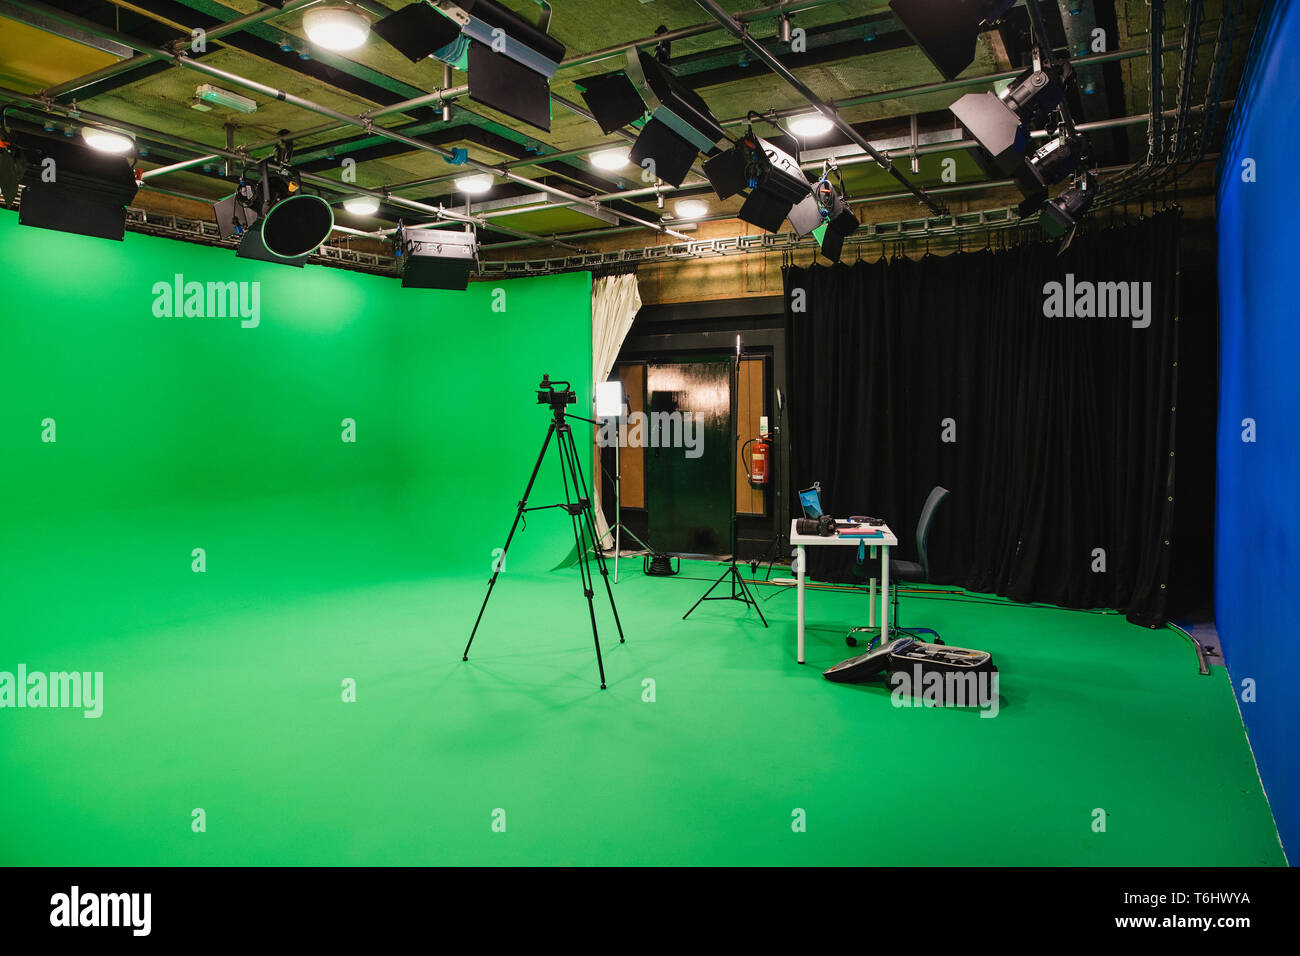 A wide-angle shot of a film studio, a green screen surrounds the room interior, a tripod stands in the middle of the room with a camera ready to film  Stock Photo